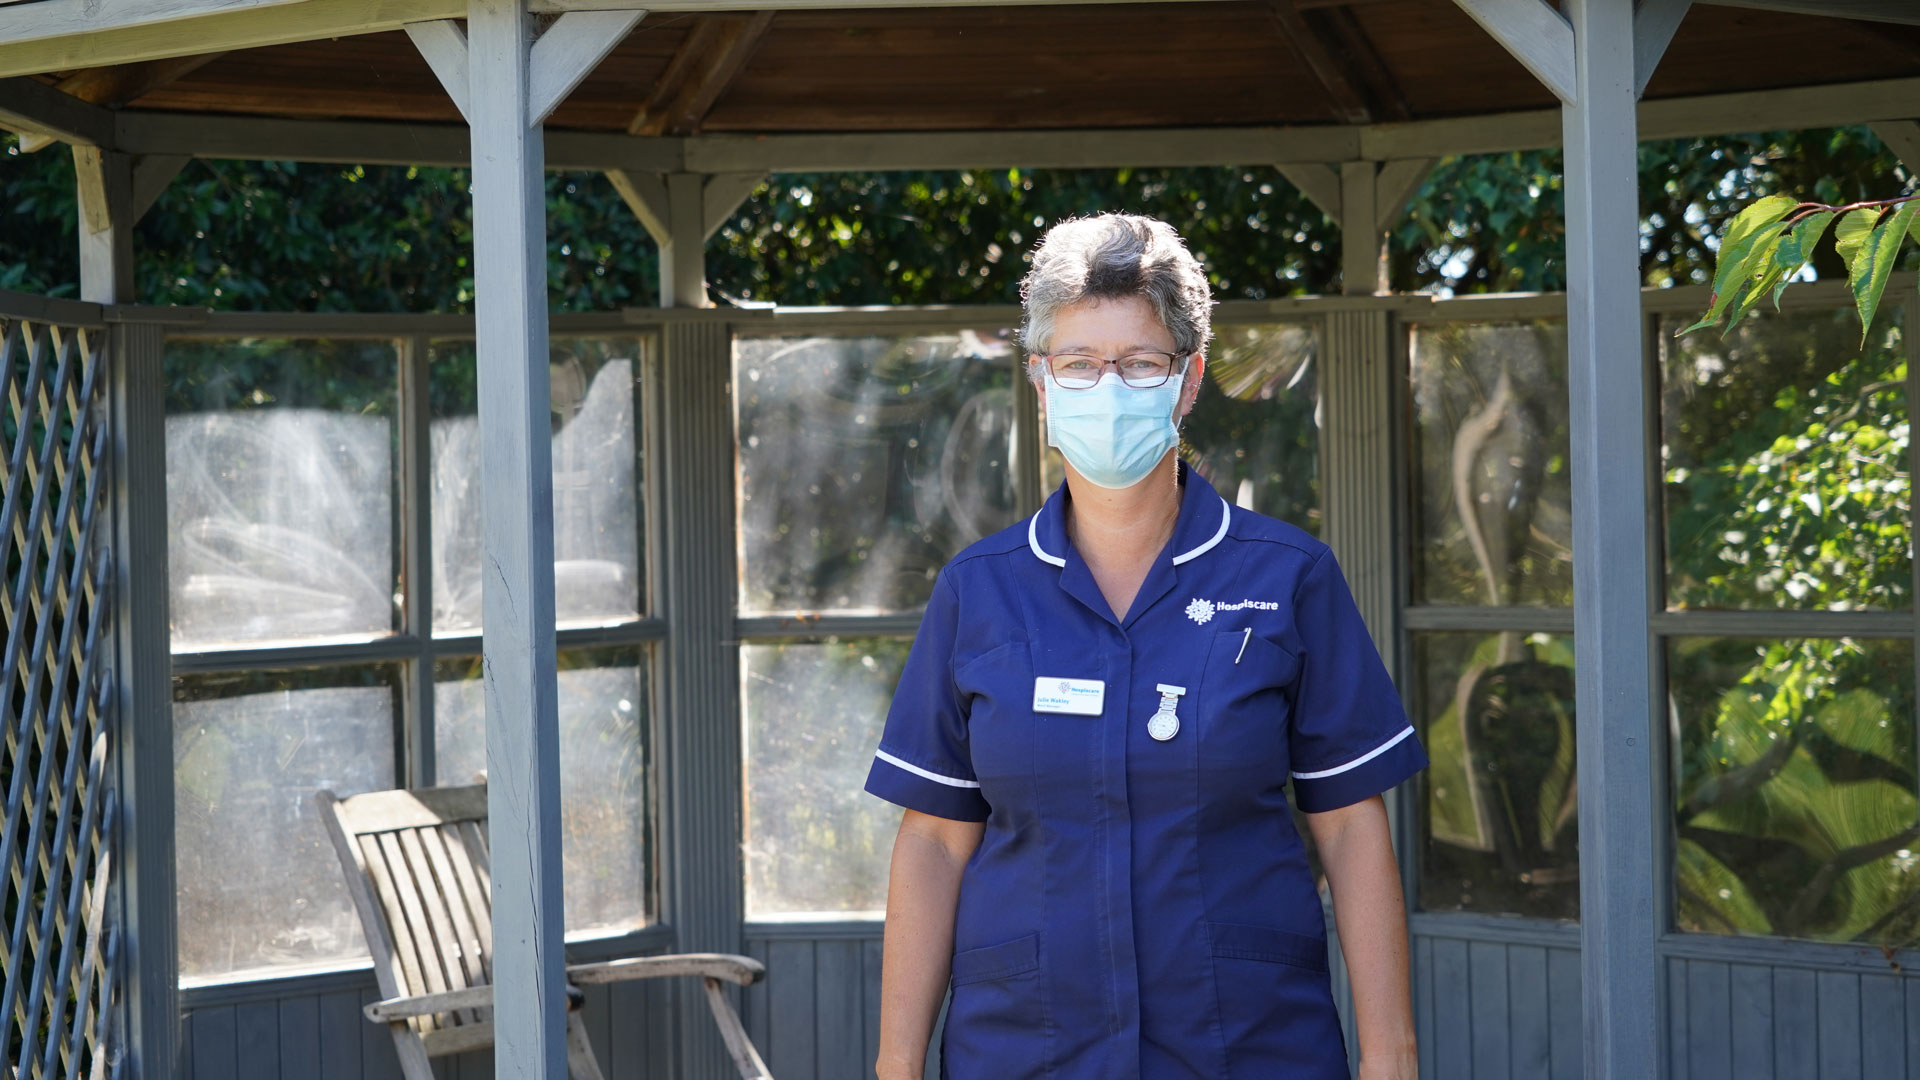 A day in the life of a Hospiscare nurse during the COVID-19 pandemic